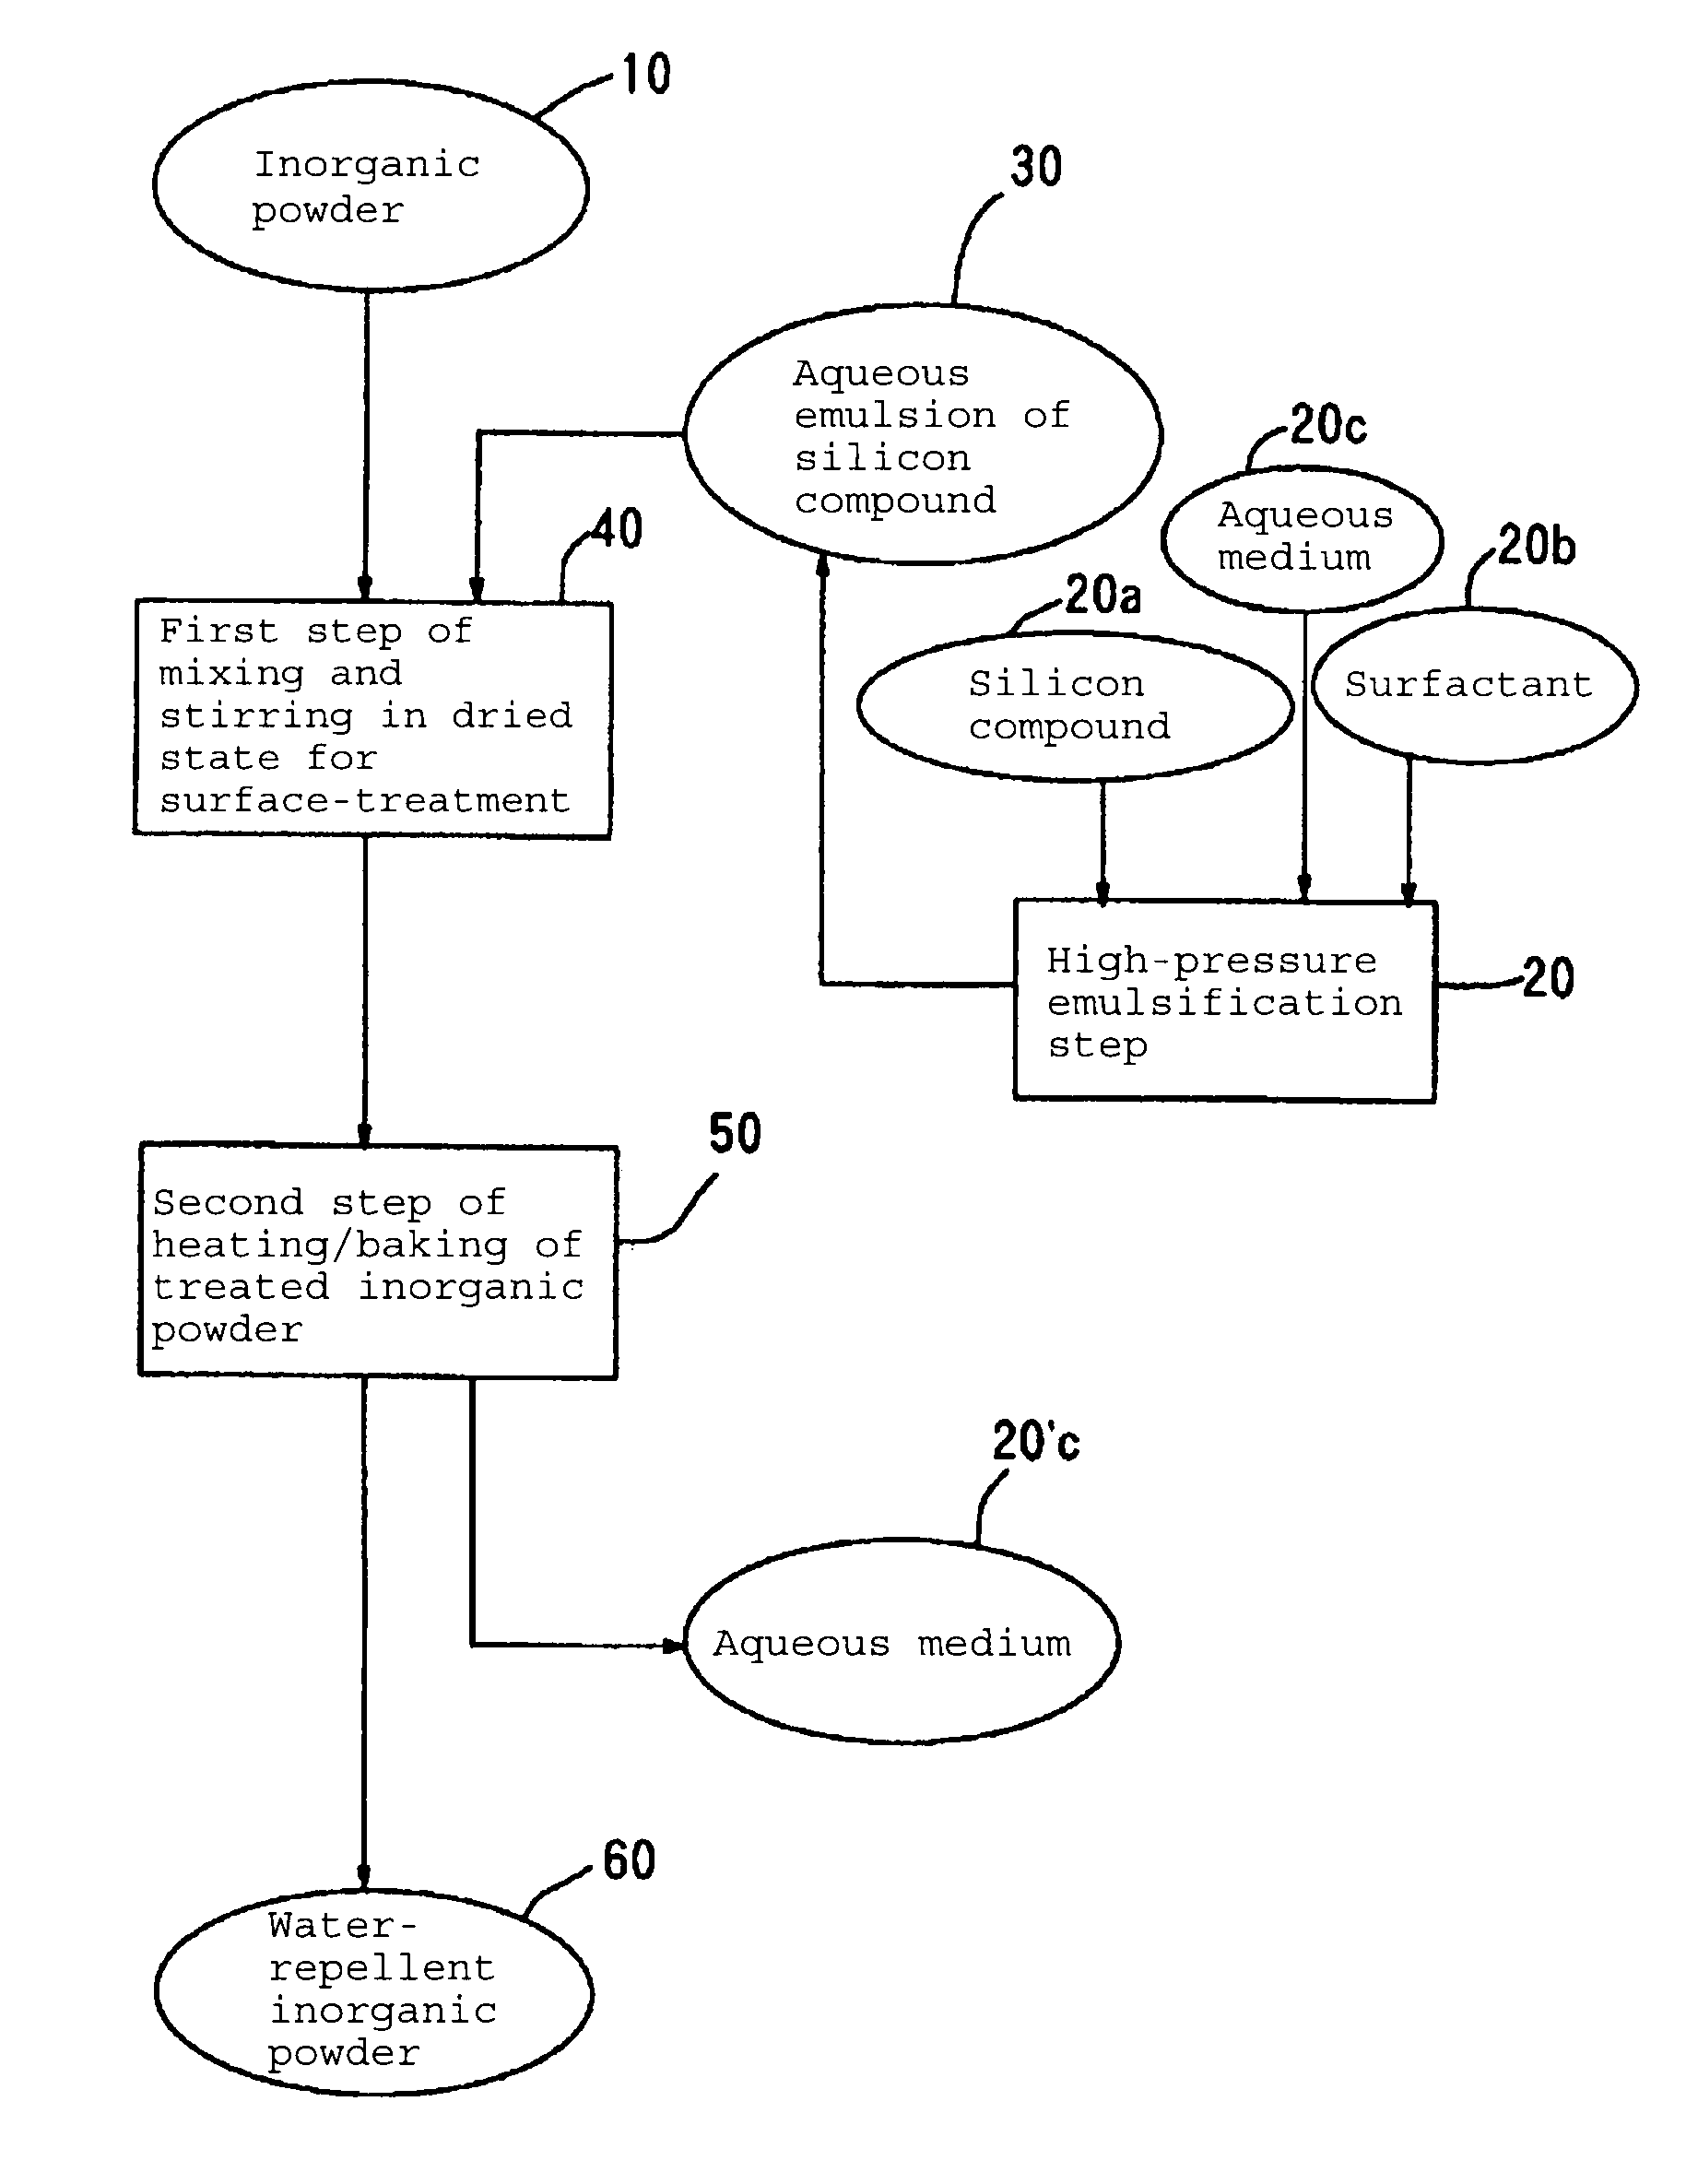 Water-repellent inorganic powder and process for its production